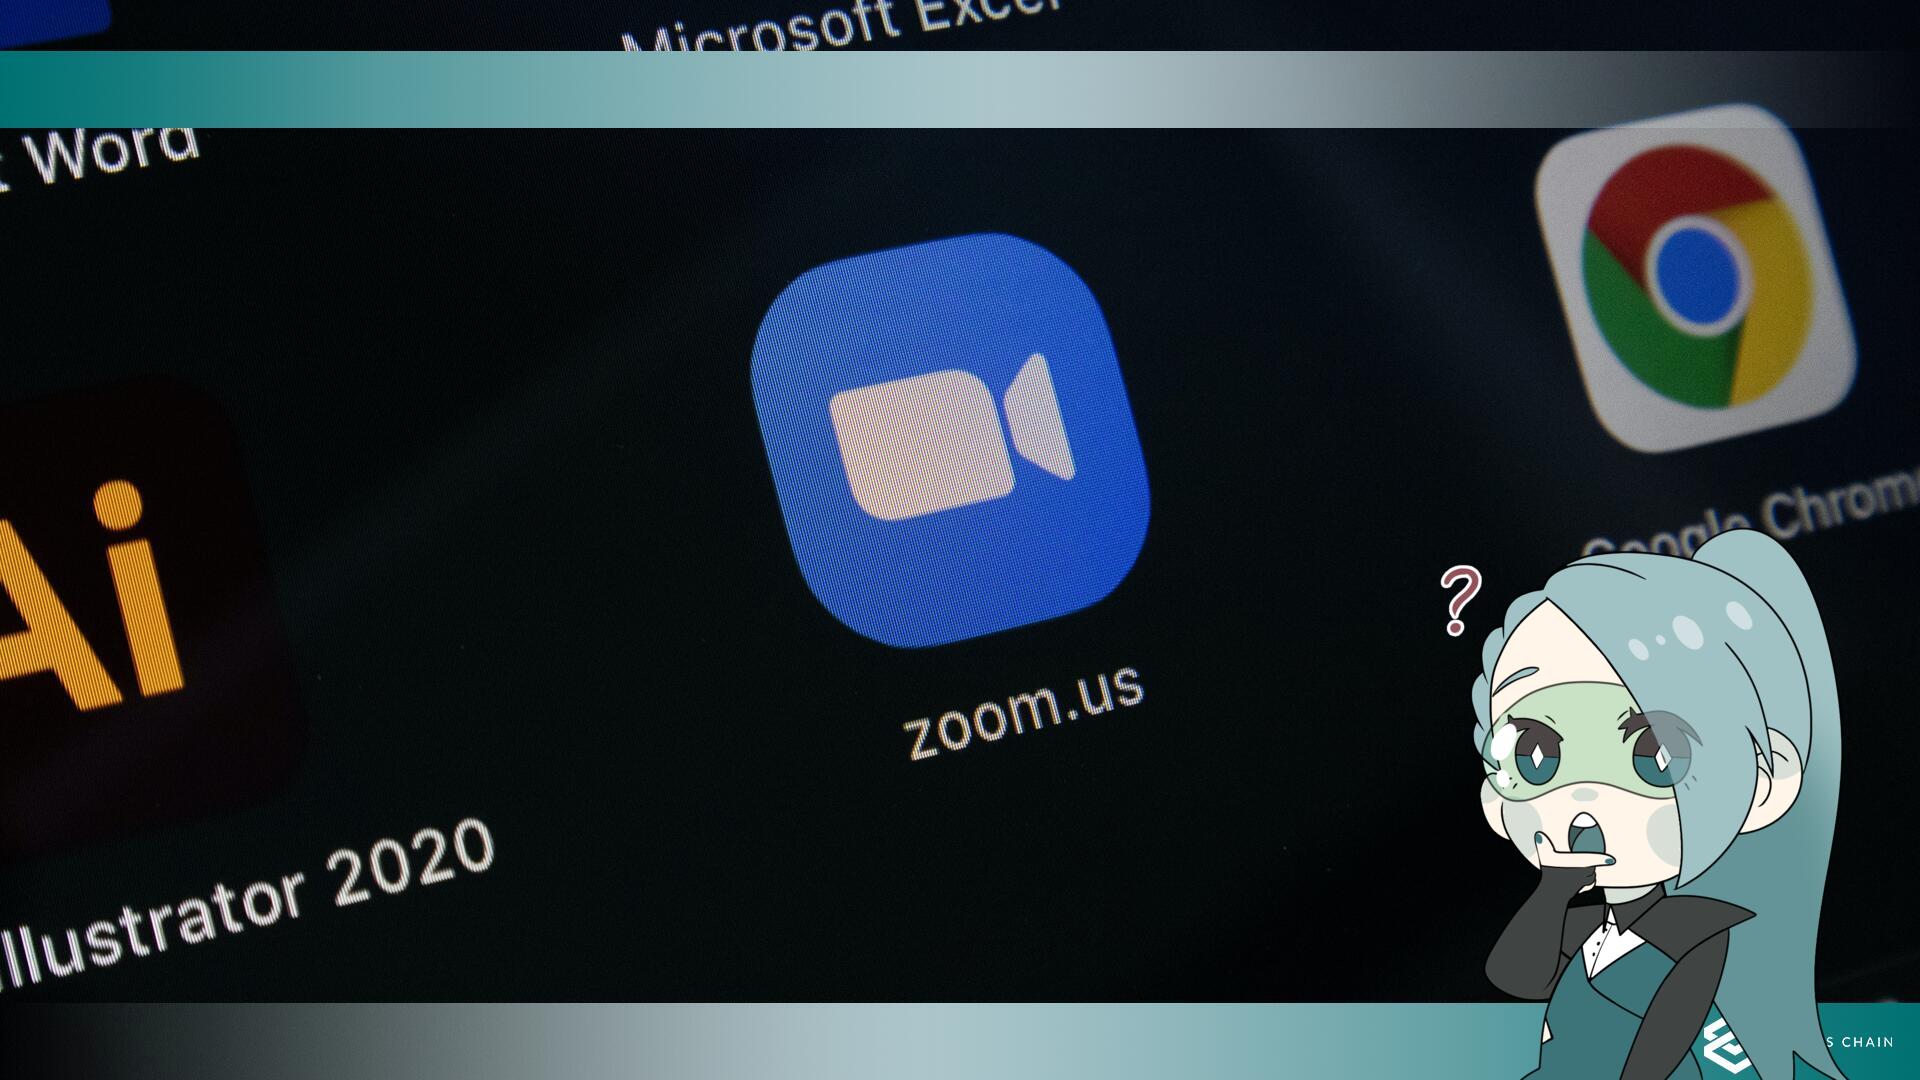  Zoom Changes TOS to Say It Won't Train AI on Your Calls 'Without Your Consent' After Backlash.